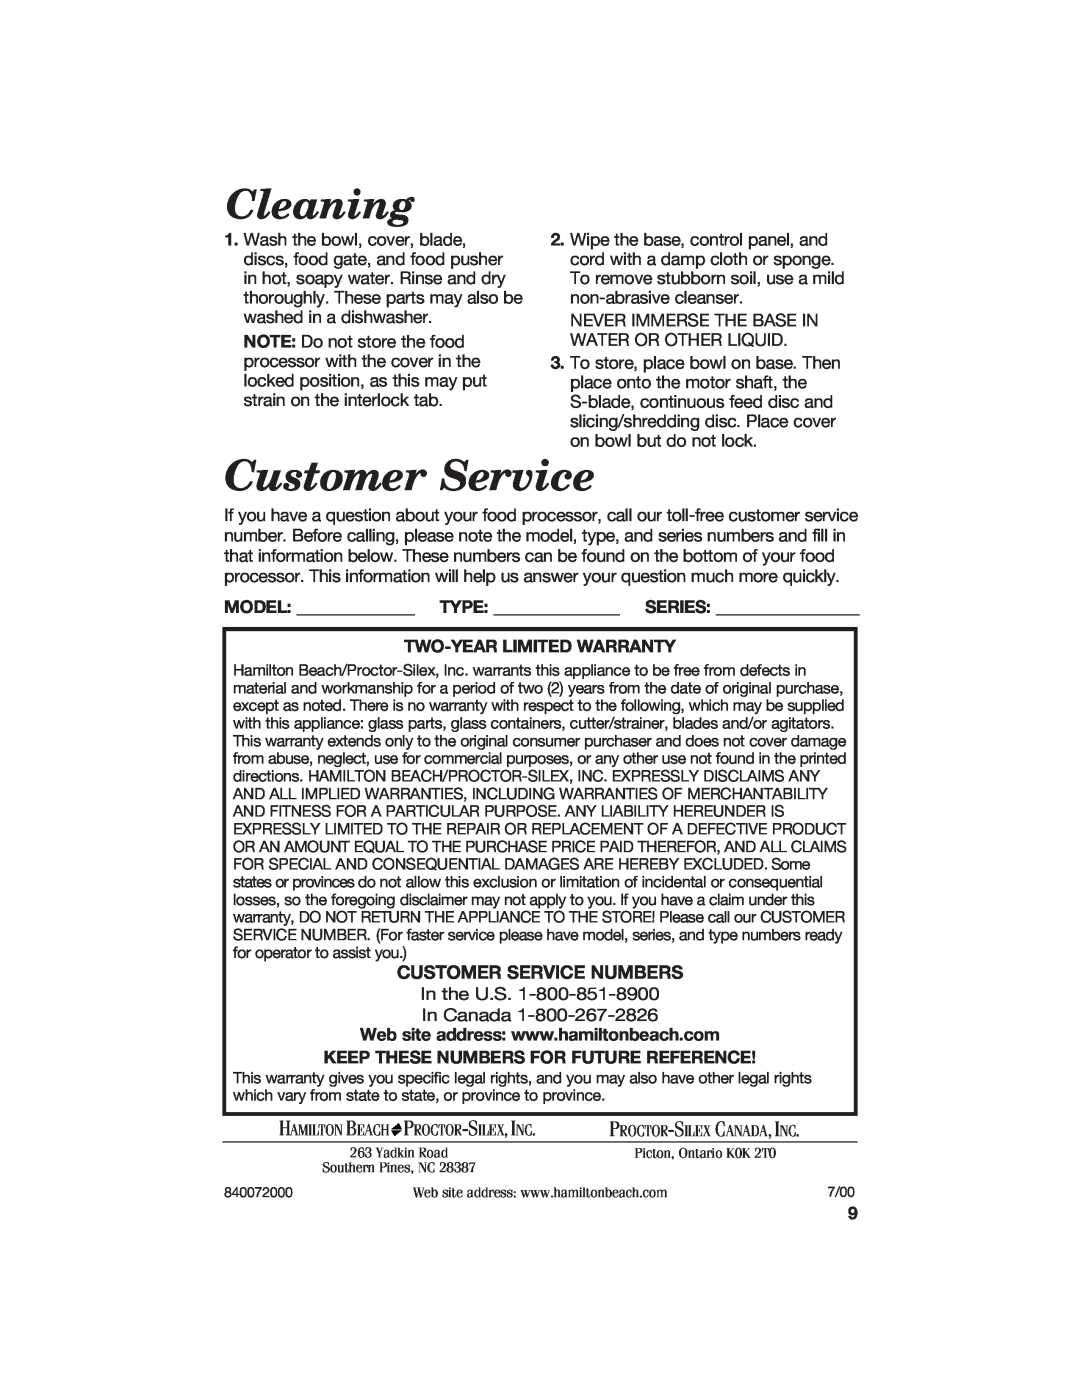 Hamilton Beach 840072000 manual Cleaning, Customer Service Numbers 